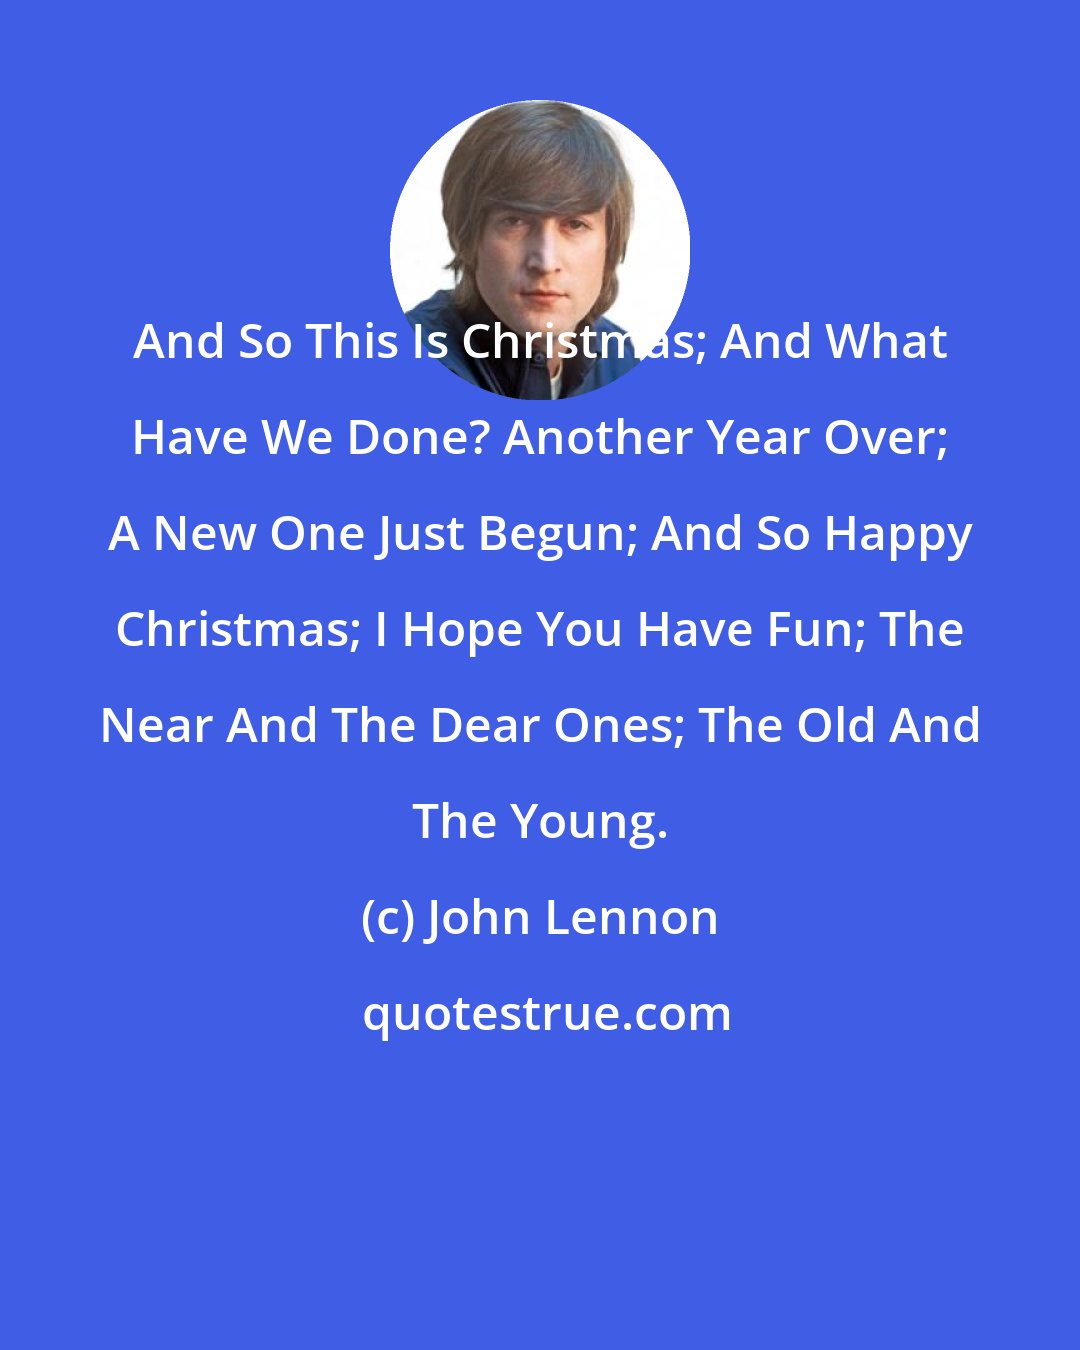 John Lennon: And So This Is Christmas; And What Have We Done? Another Year Over; A New One Just Begun; And So Happy Christmas; I Hope You Have Fun; The Near And The Dear Ones; The Old And The Young.